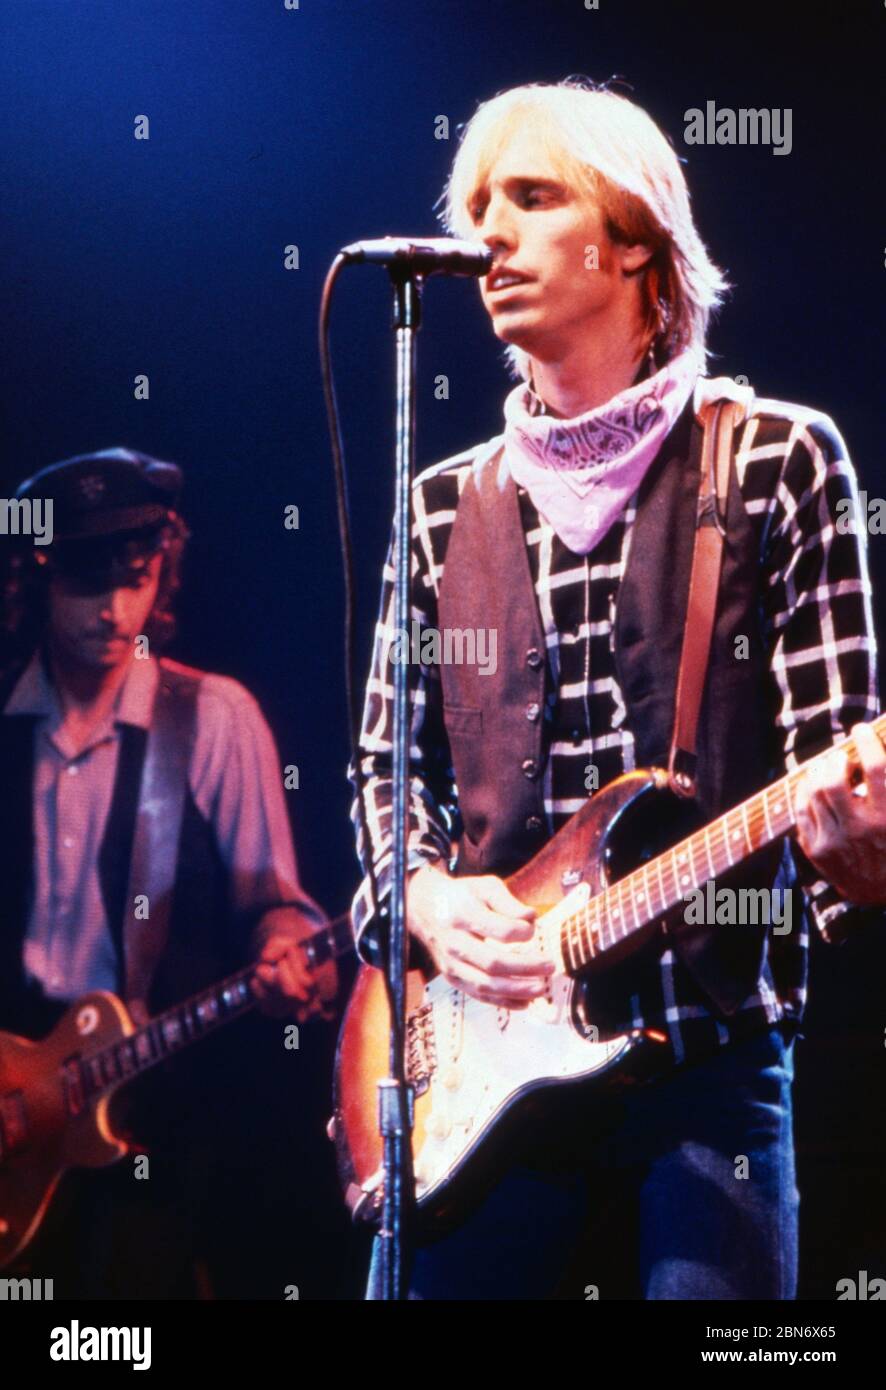 Tom Petty and the Heartbreakers, spielen live on stage bei 'Rockpop in Concert', Deutschland 1983. American band 'Tom Petty and the Heartbreakers' performing, Germany 1983. Stock Photo